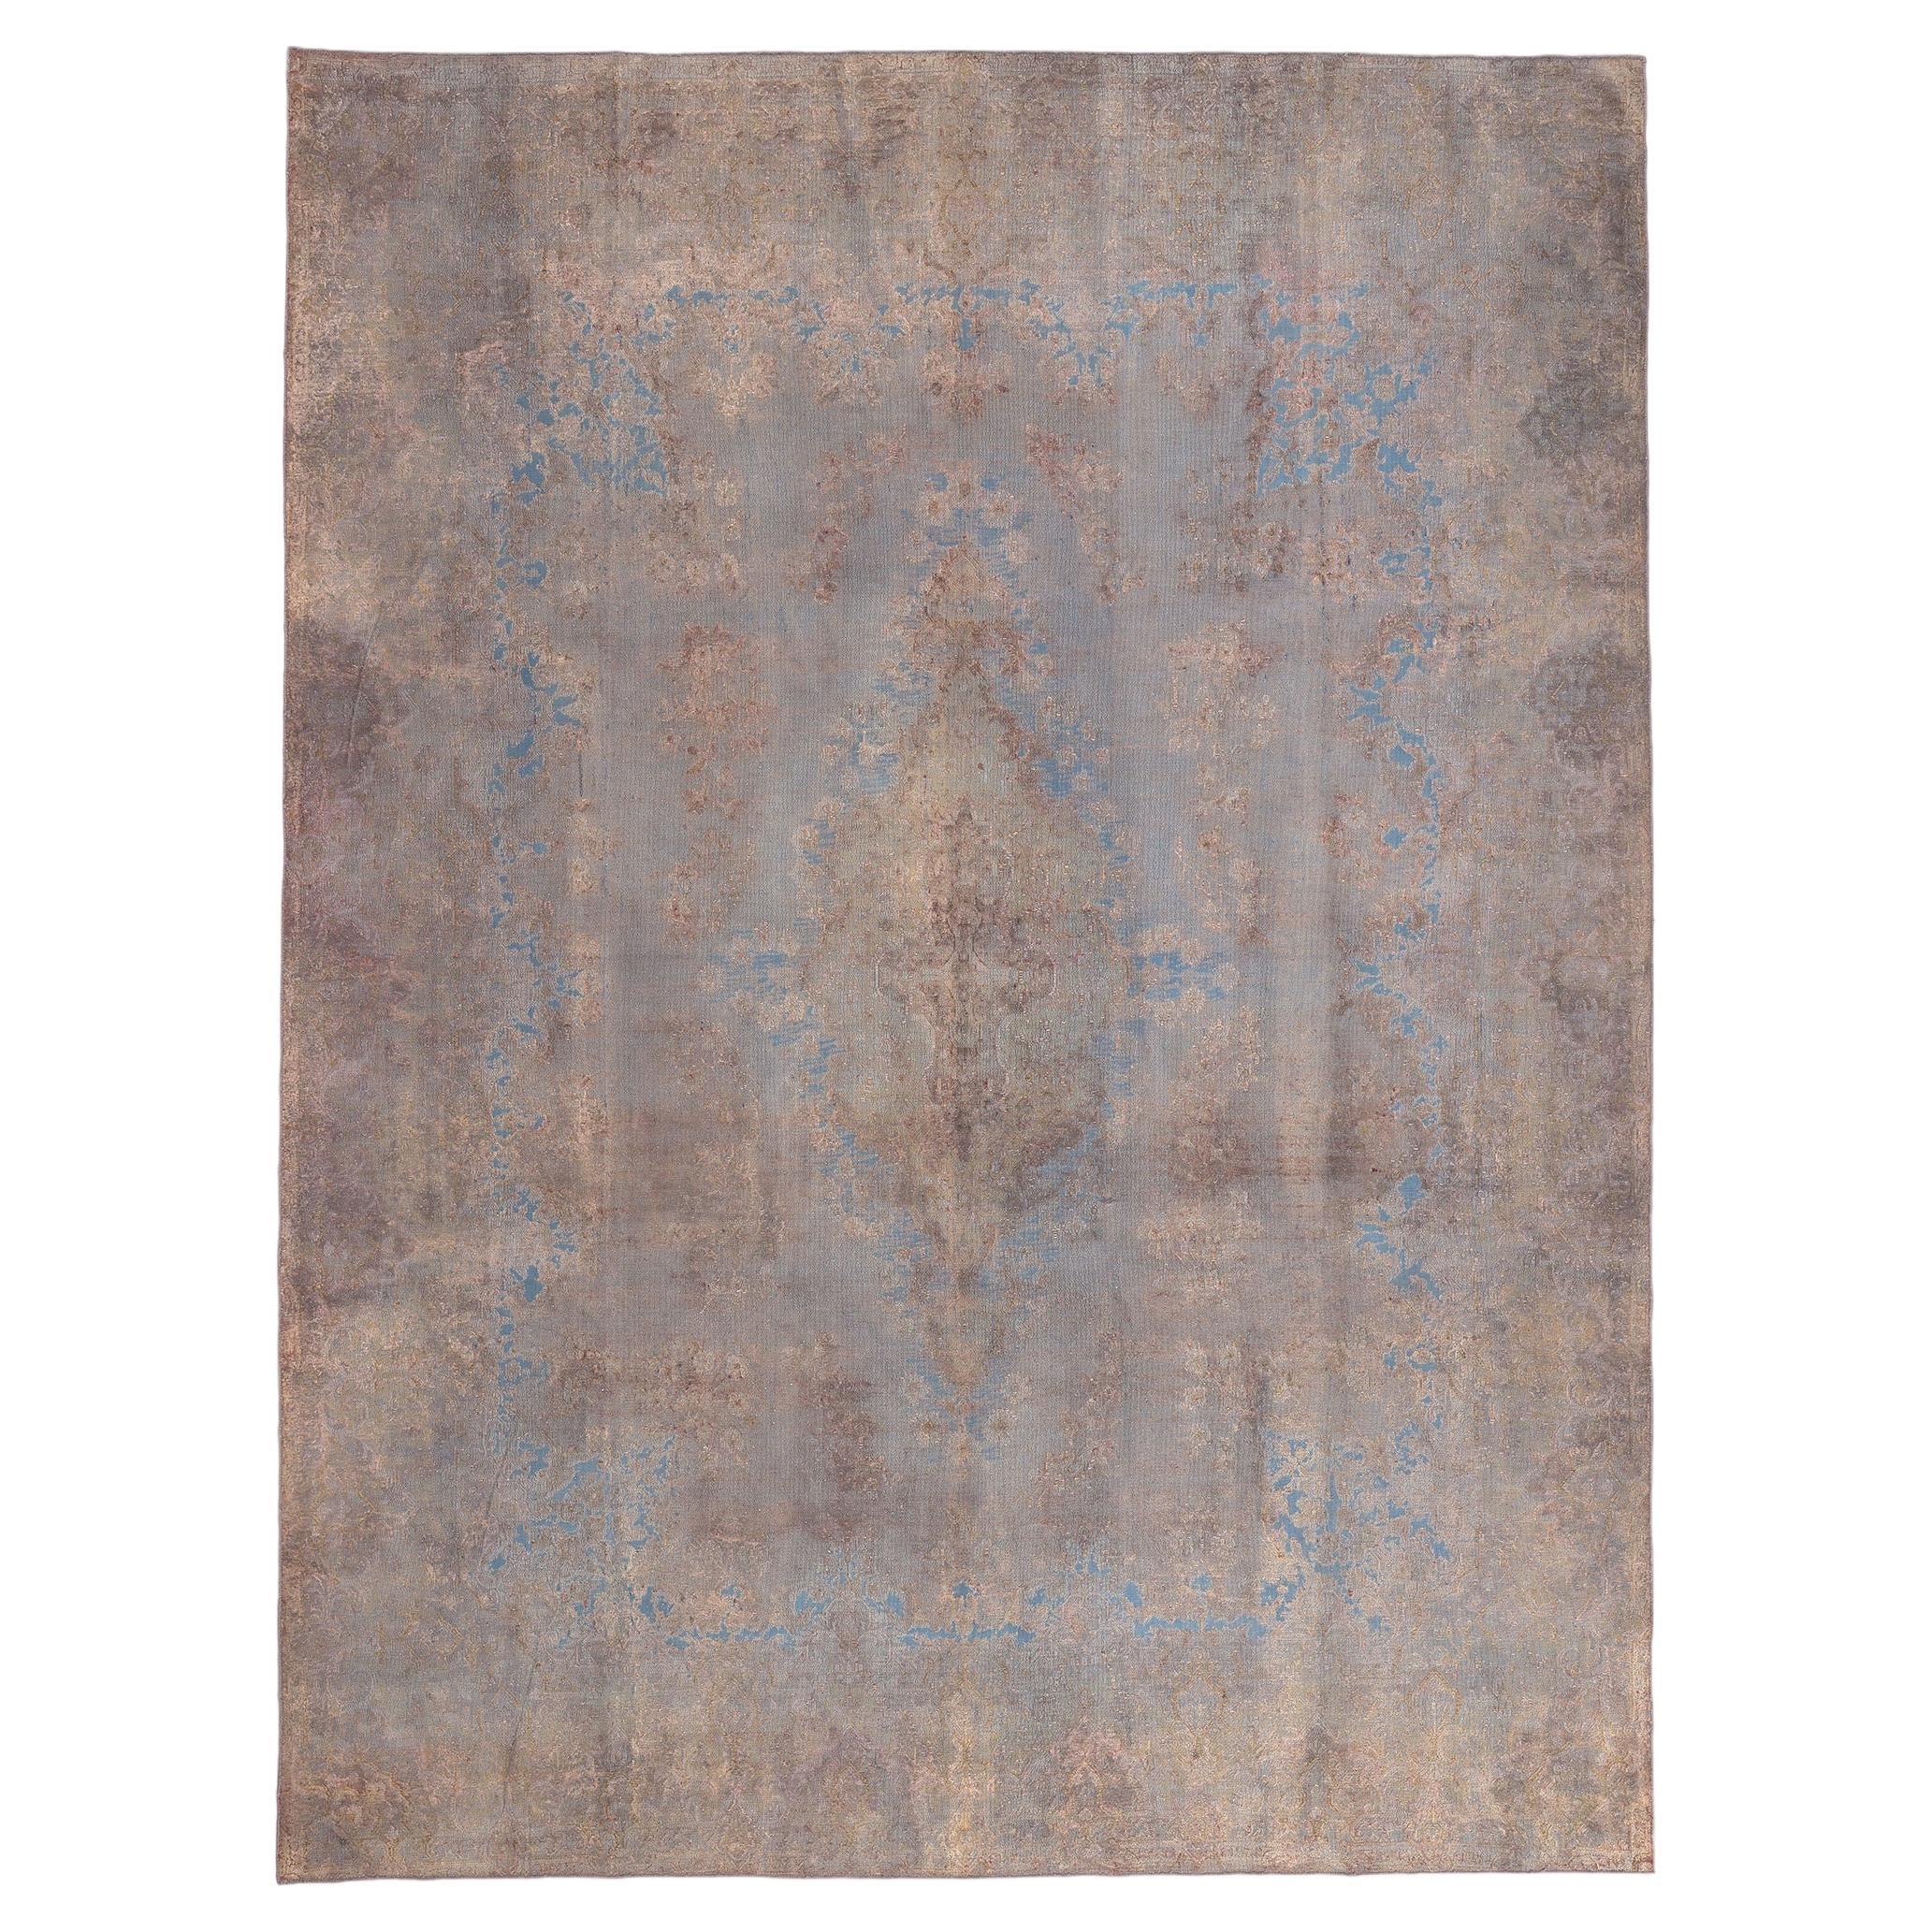 Vintage Turkish Overdyed Rug, French Provincial Meets Modern Bridgerton Style For Sale